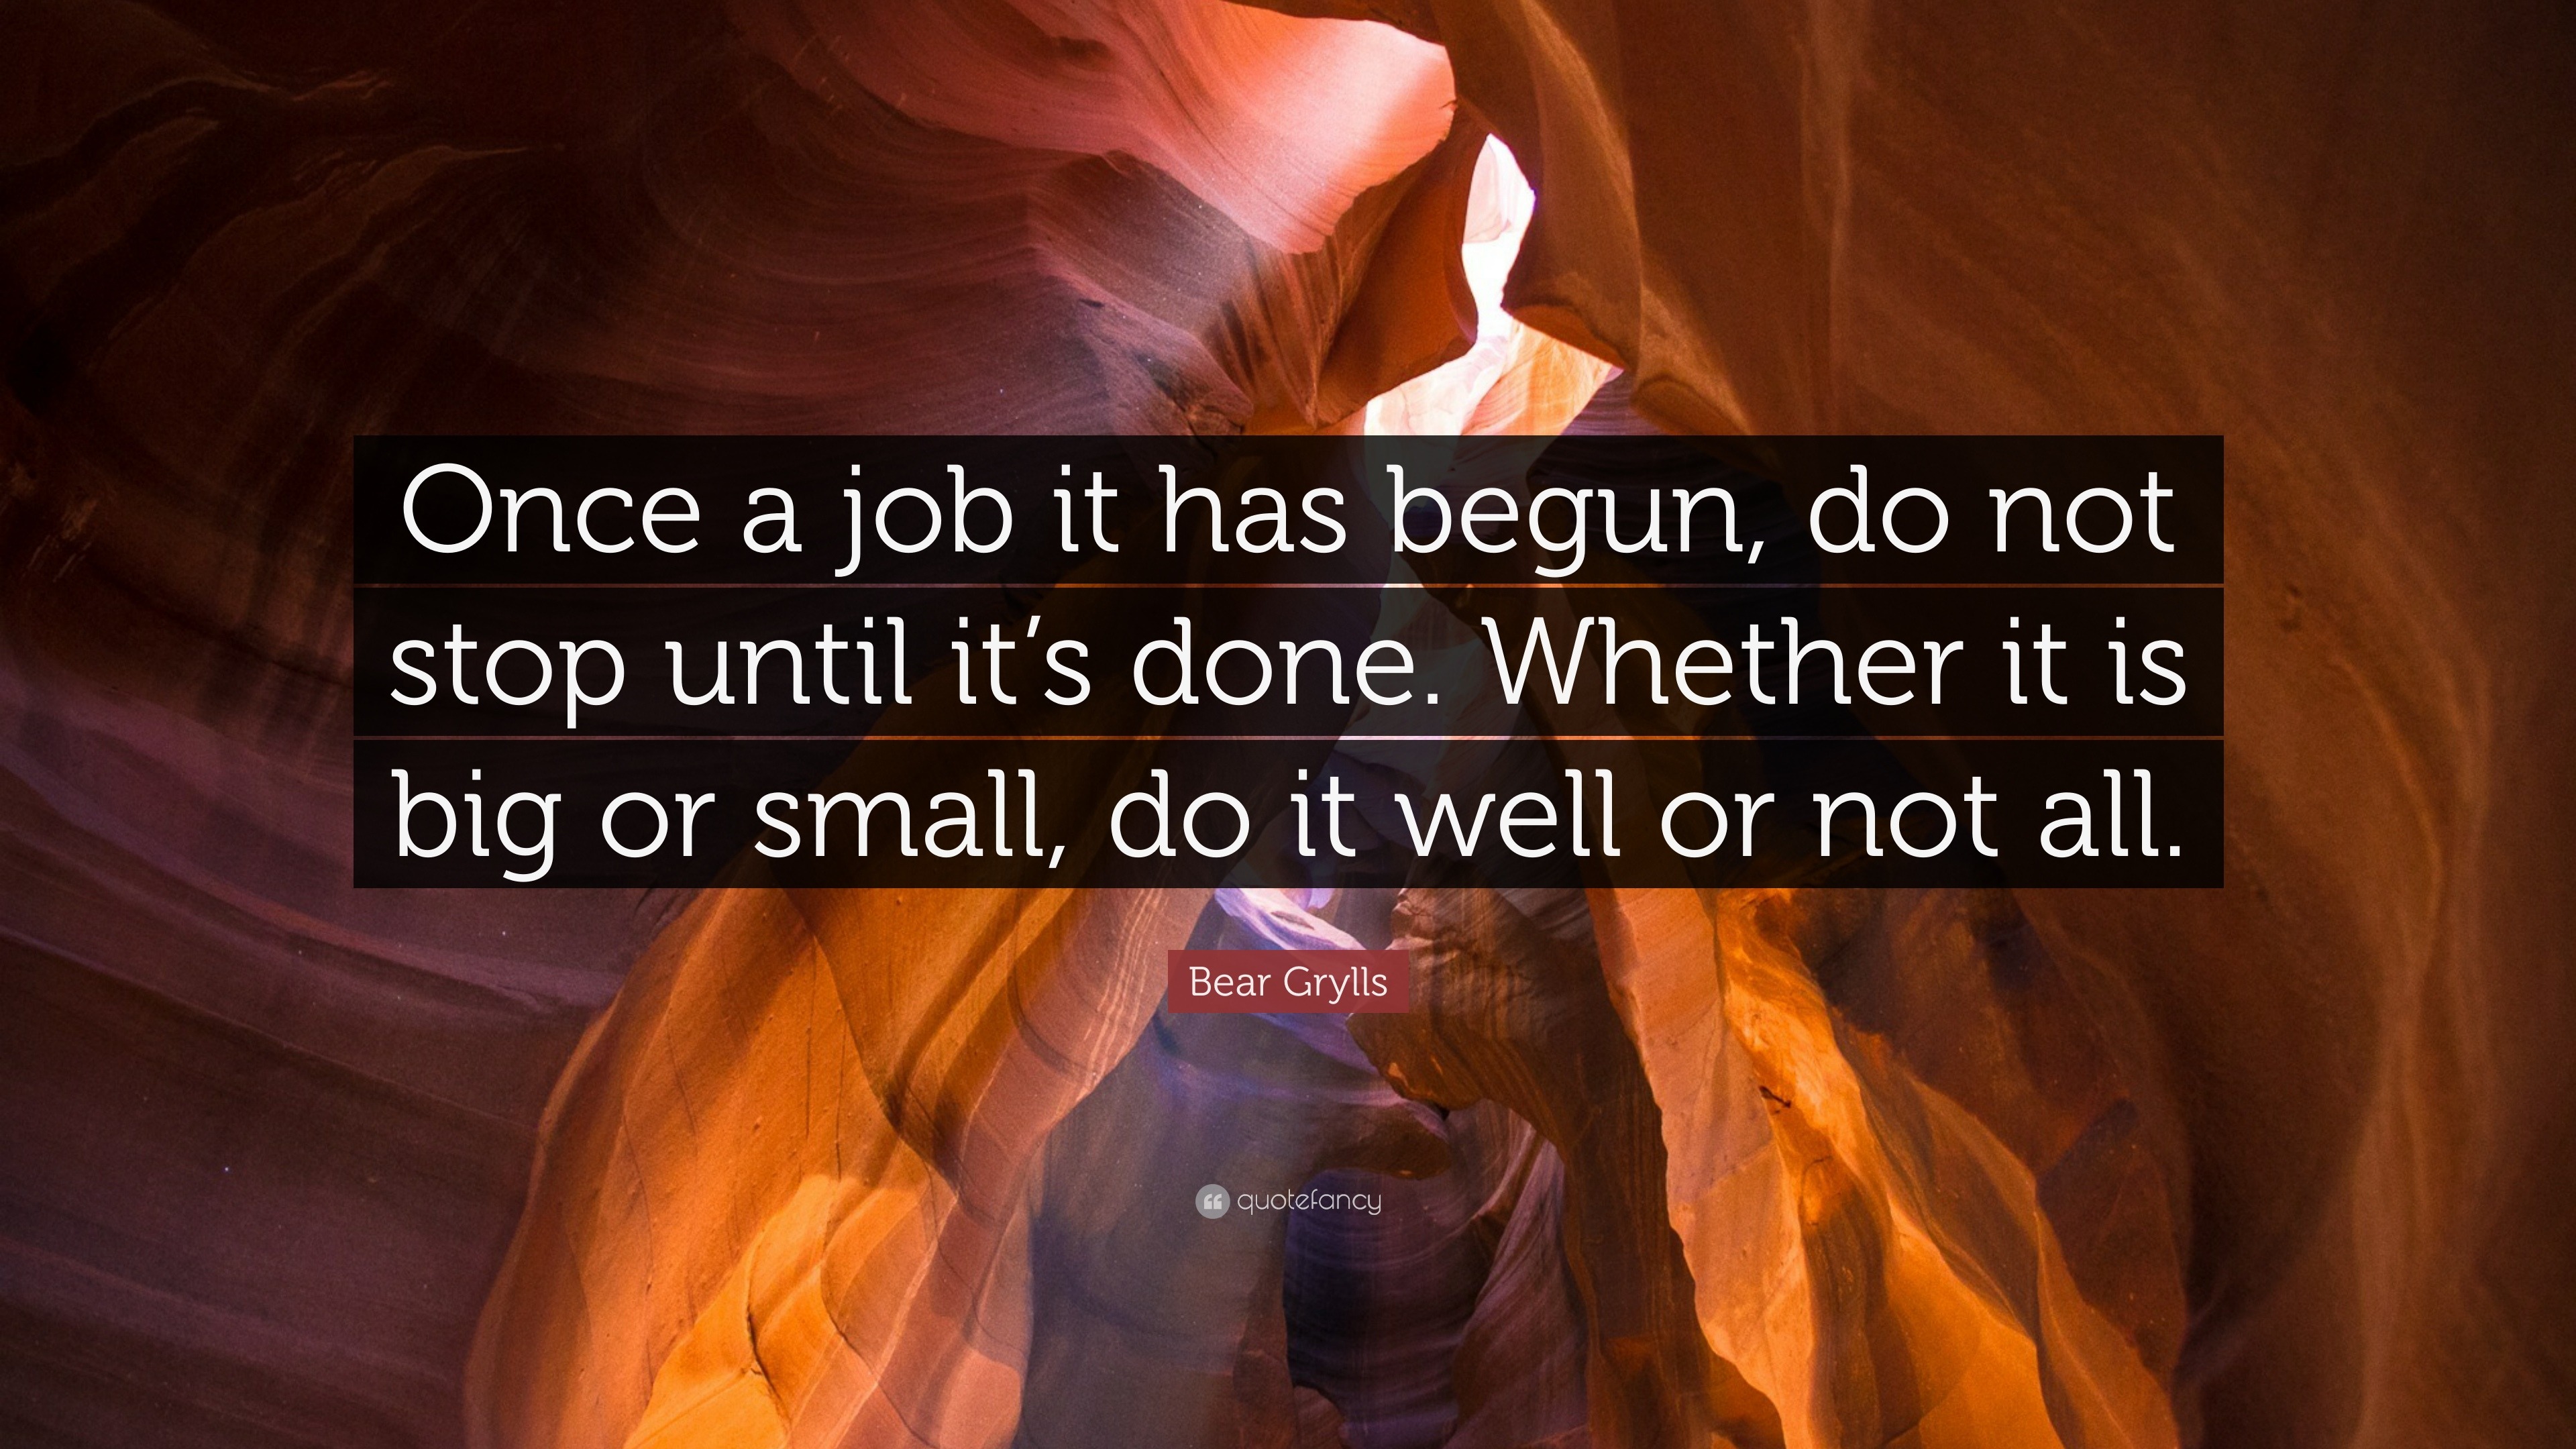 Bear Grylls Quote “once A Job It Has Begun Do Not Stop Until It S Done Whether It Is Big Or